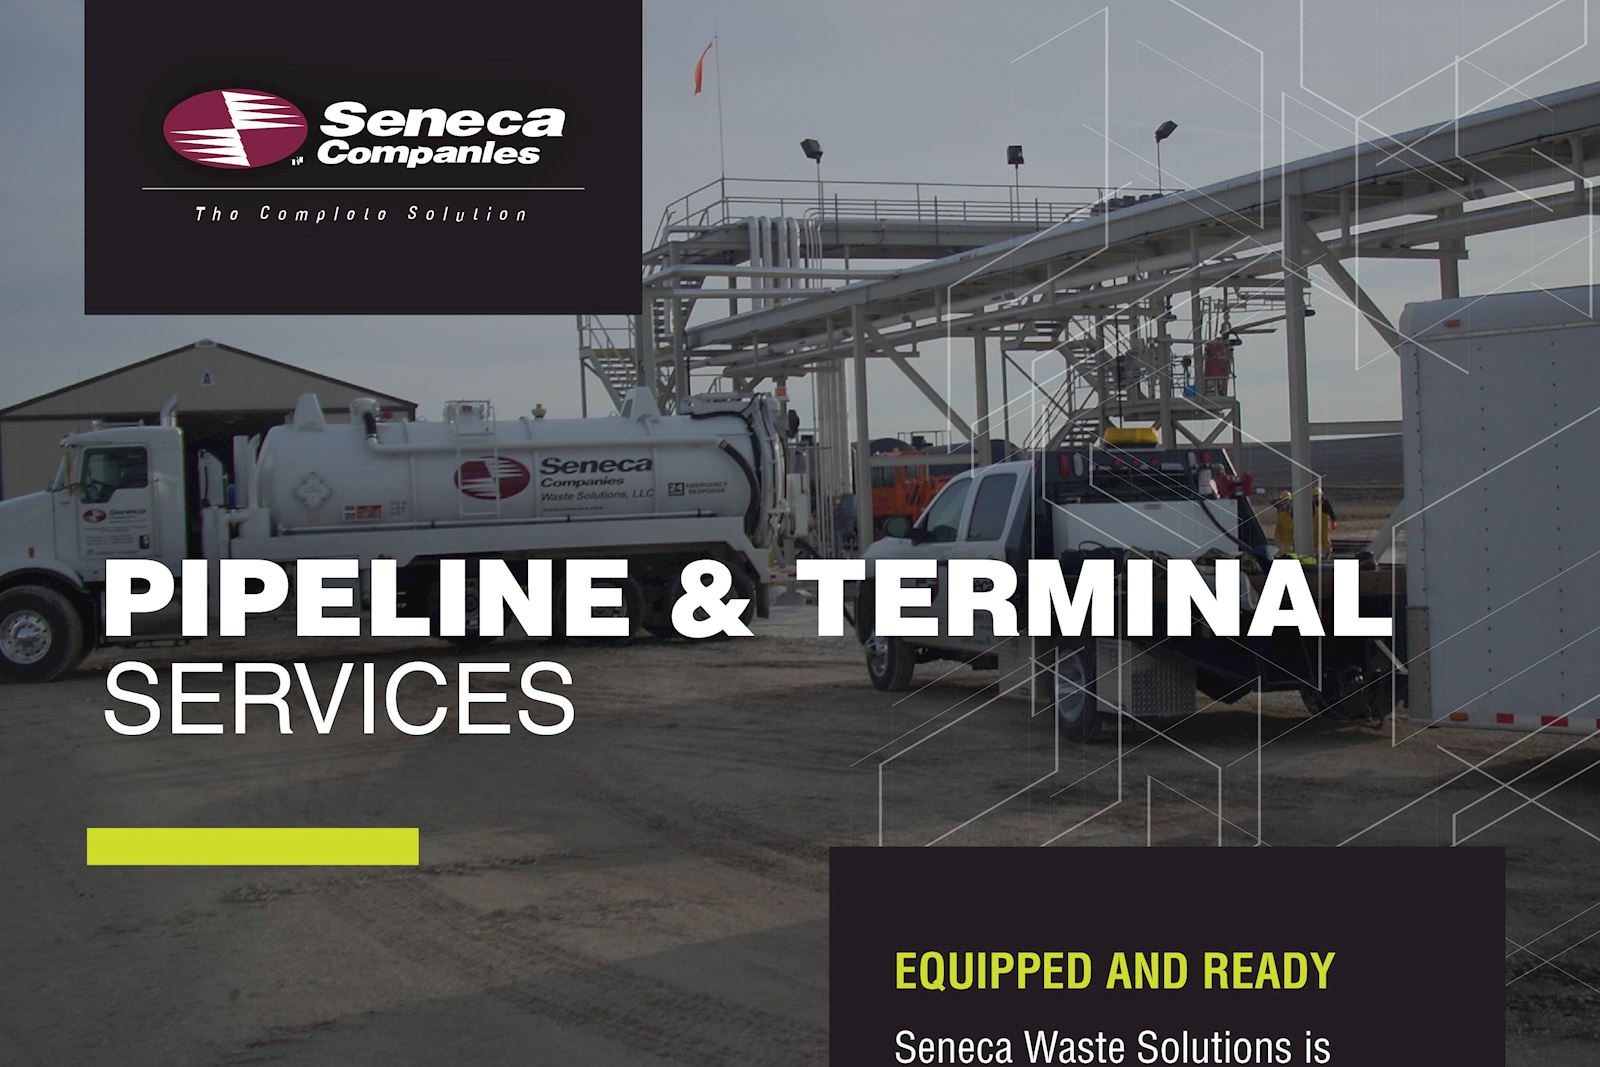 Pipeline & Terminal Services